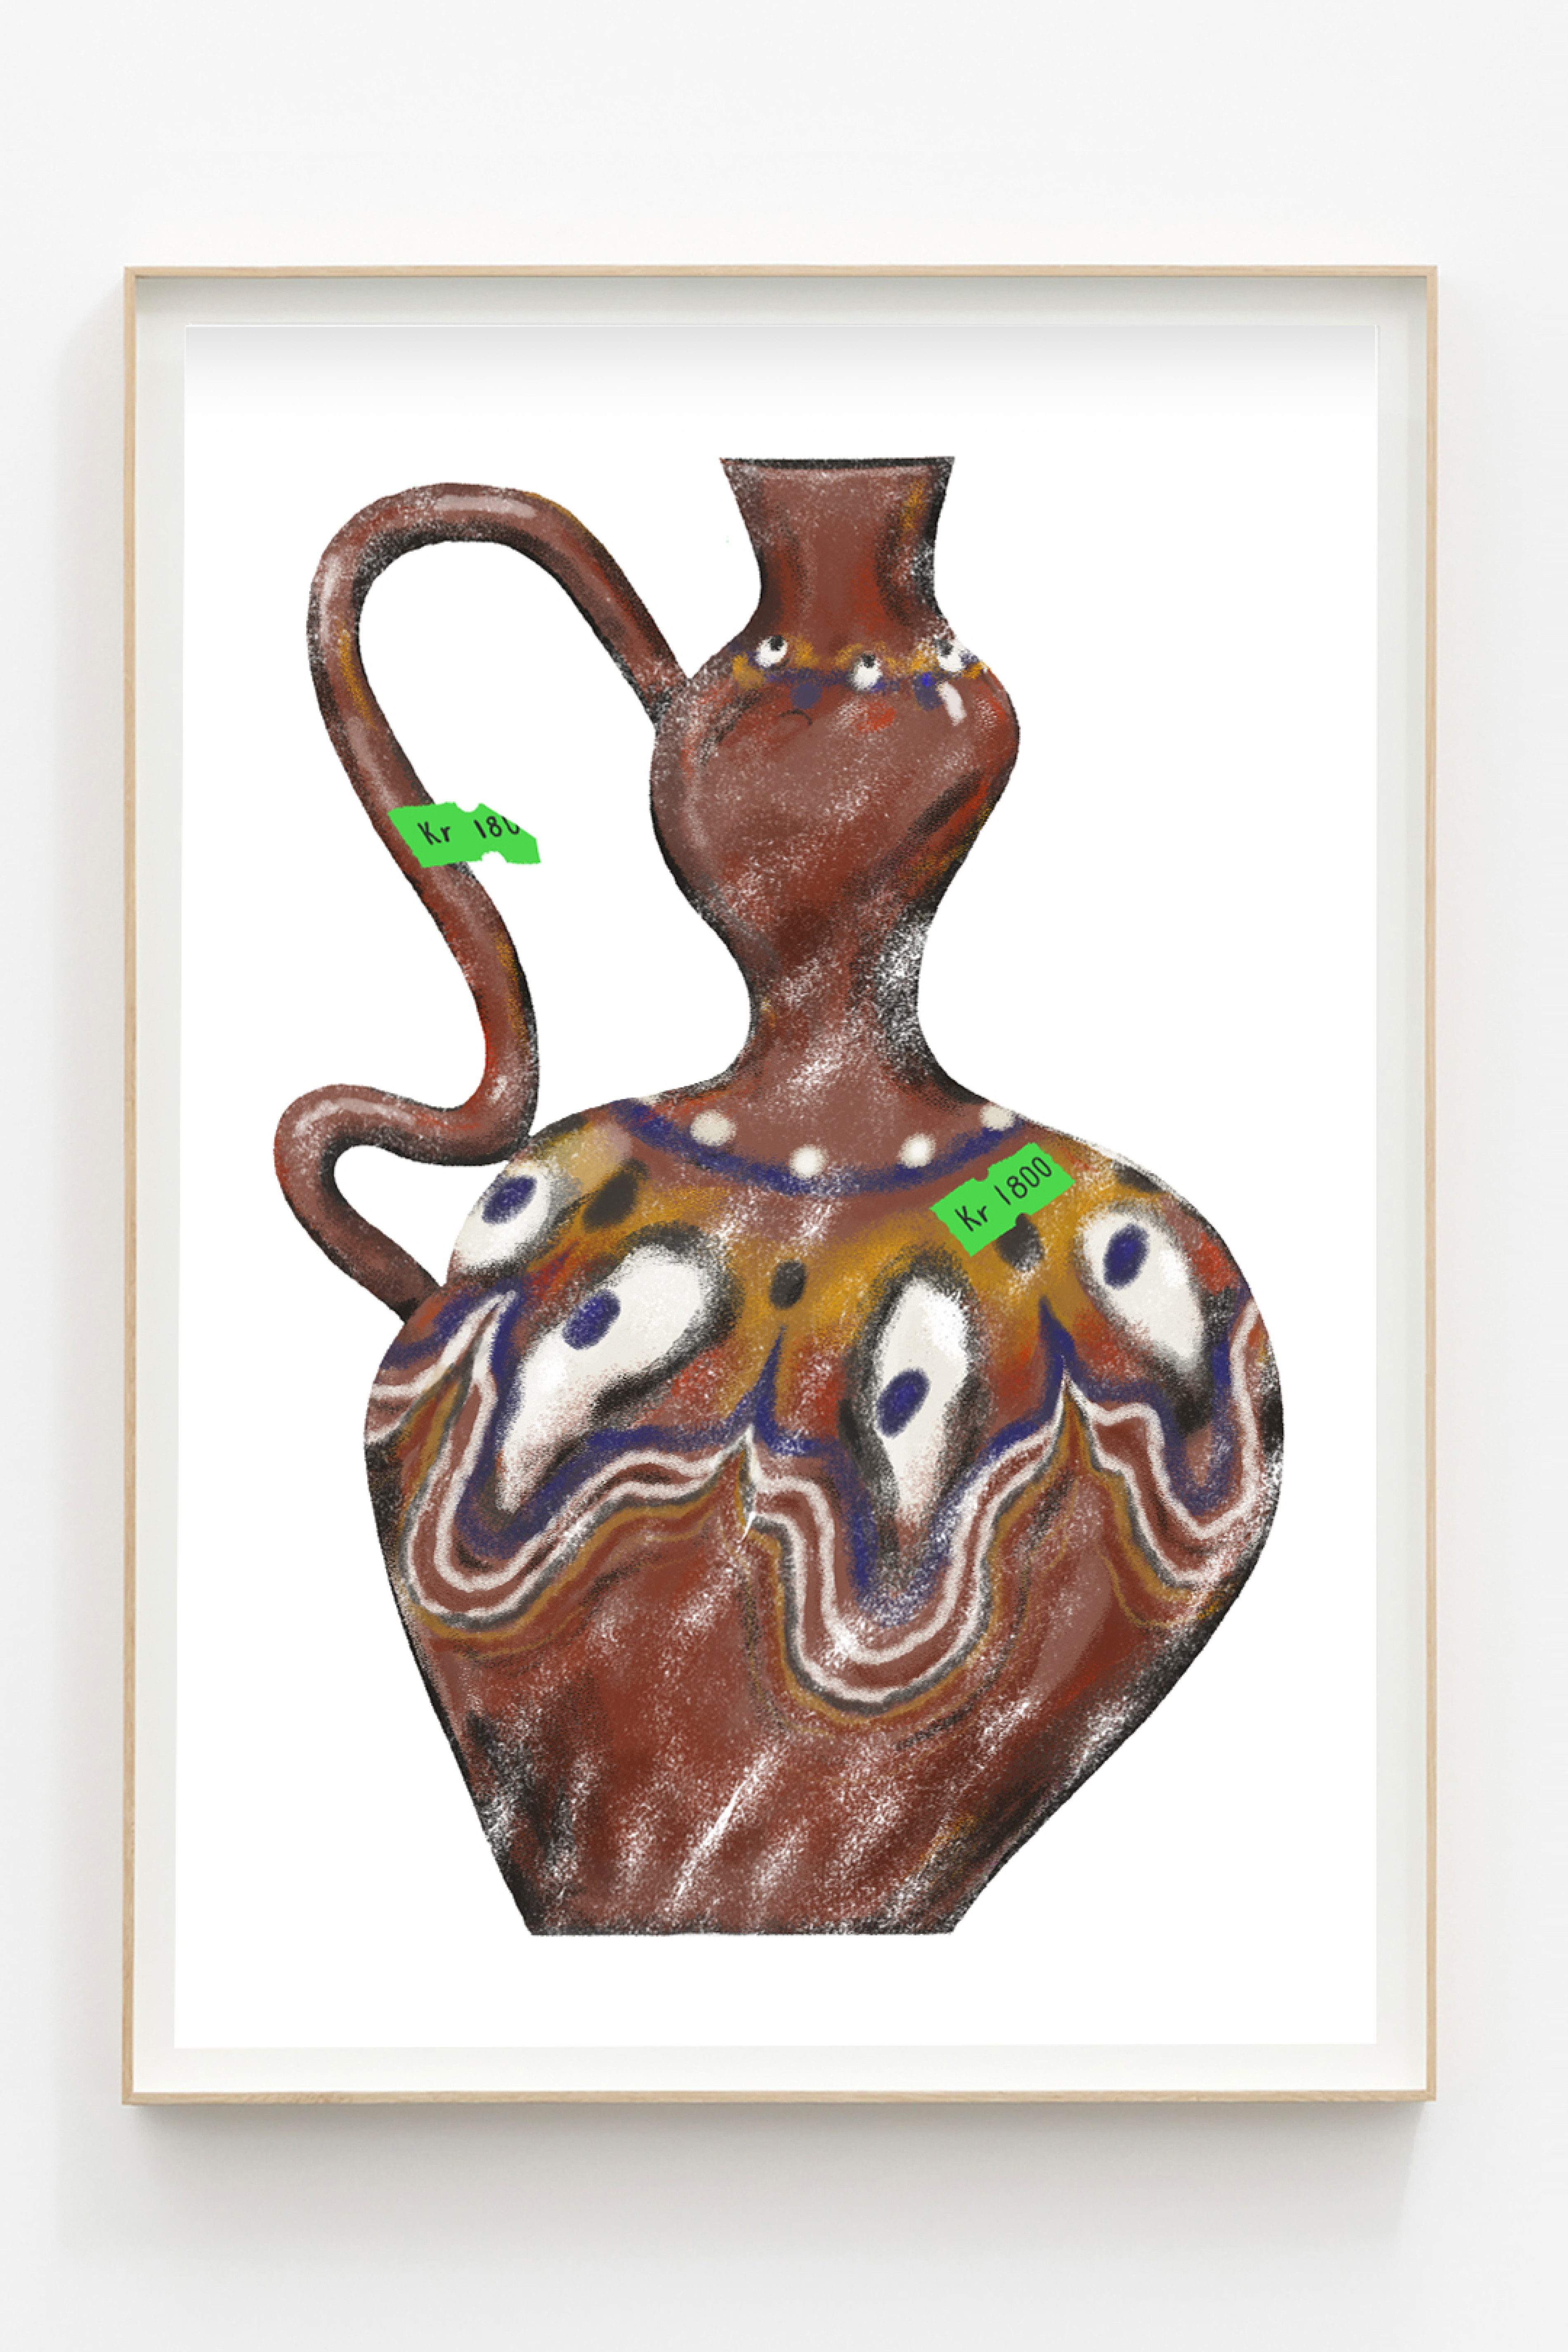 Illustration of a brown curvy vase on a white background.